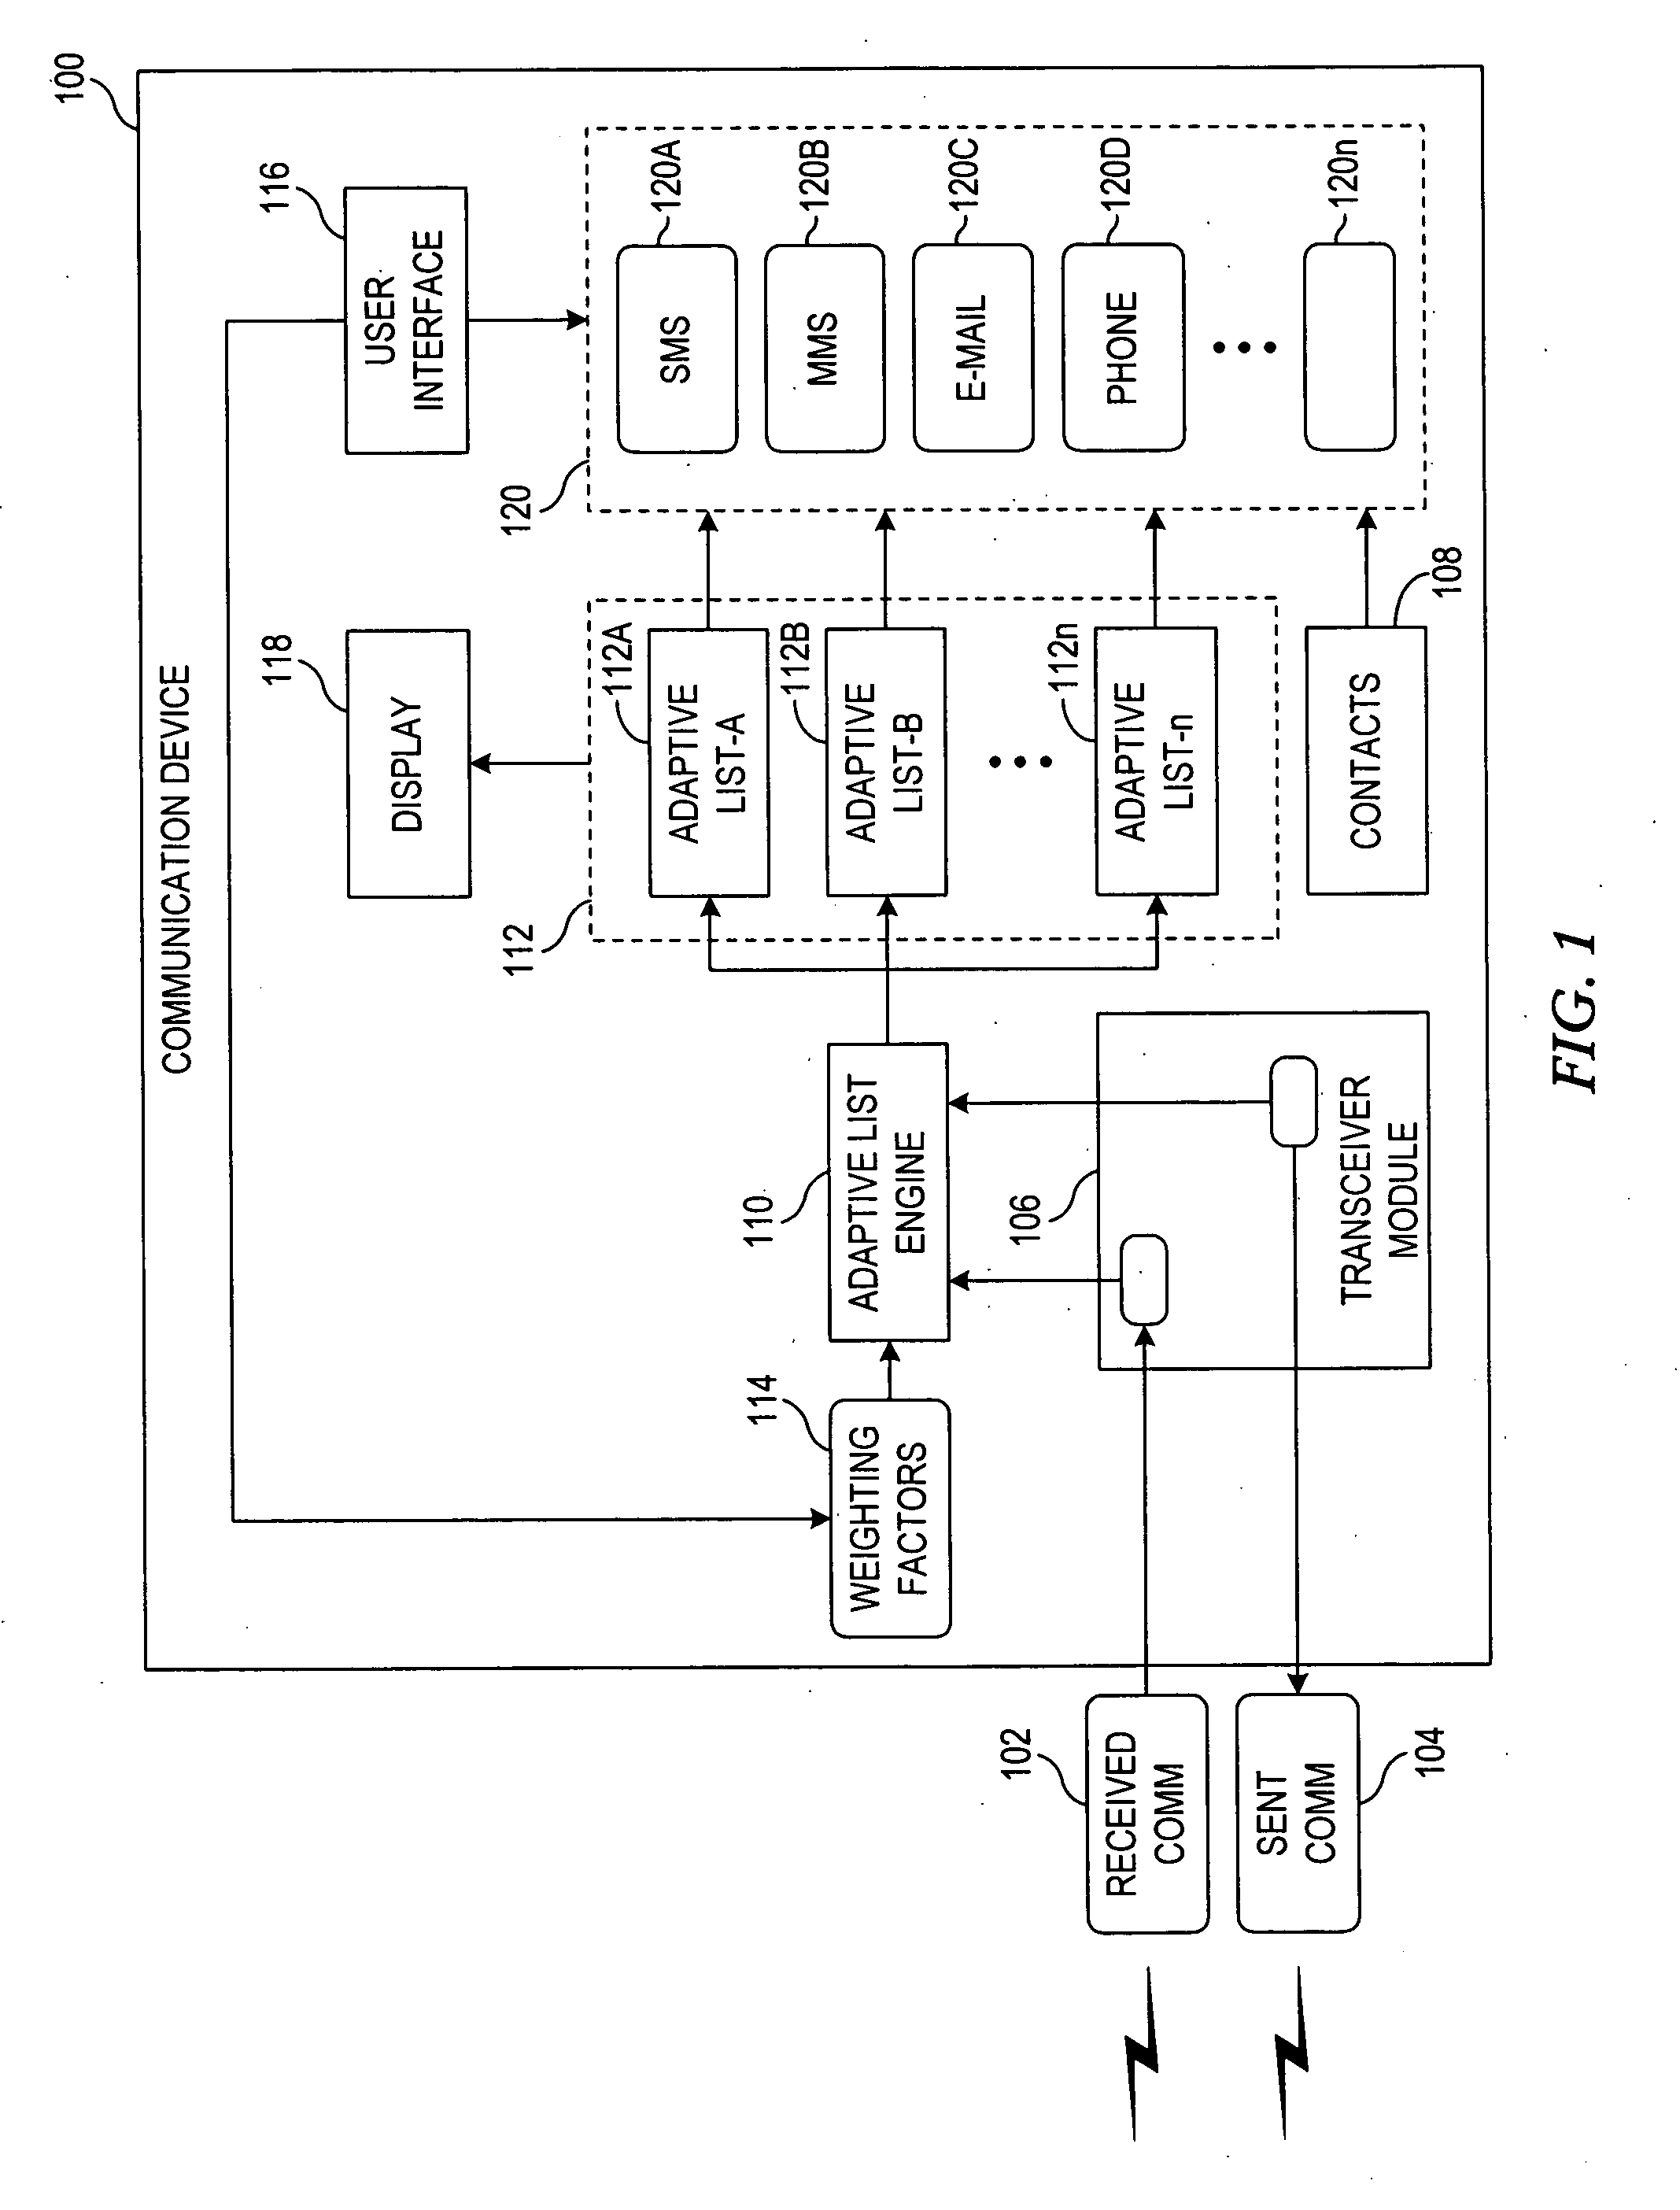 Apparatus and method for facilitating contact selection in communication devices